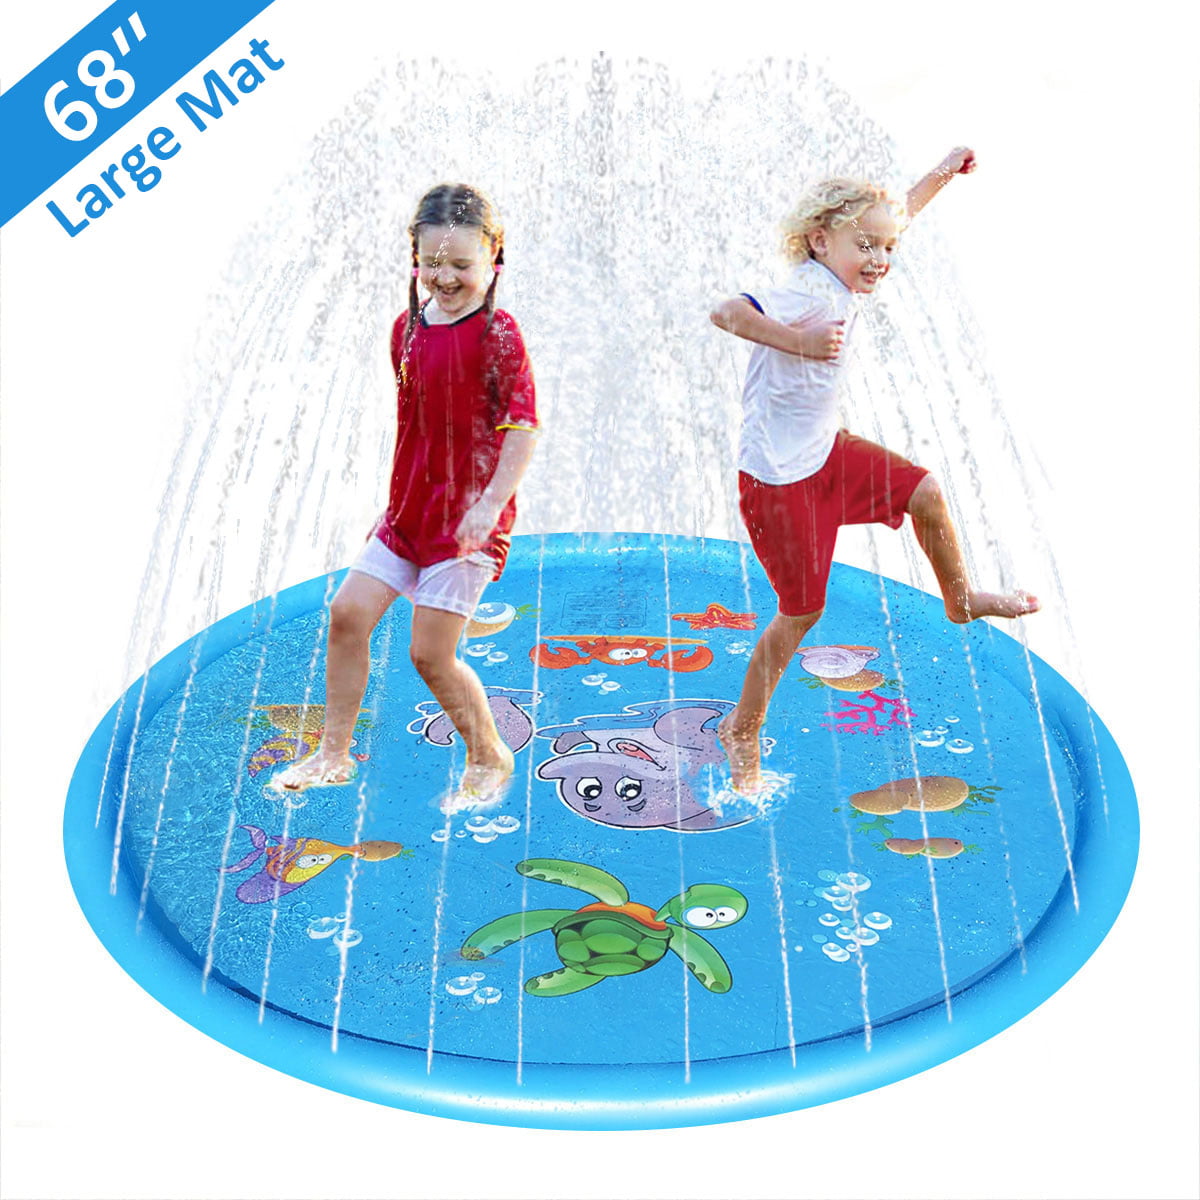 Yellcetoy Splash Mat Kids Sprinkler Pad Water Play Mat Water Toys For Kids Outdoor Summer Garden Toys for Kids Babies Toddlers 68 